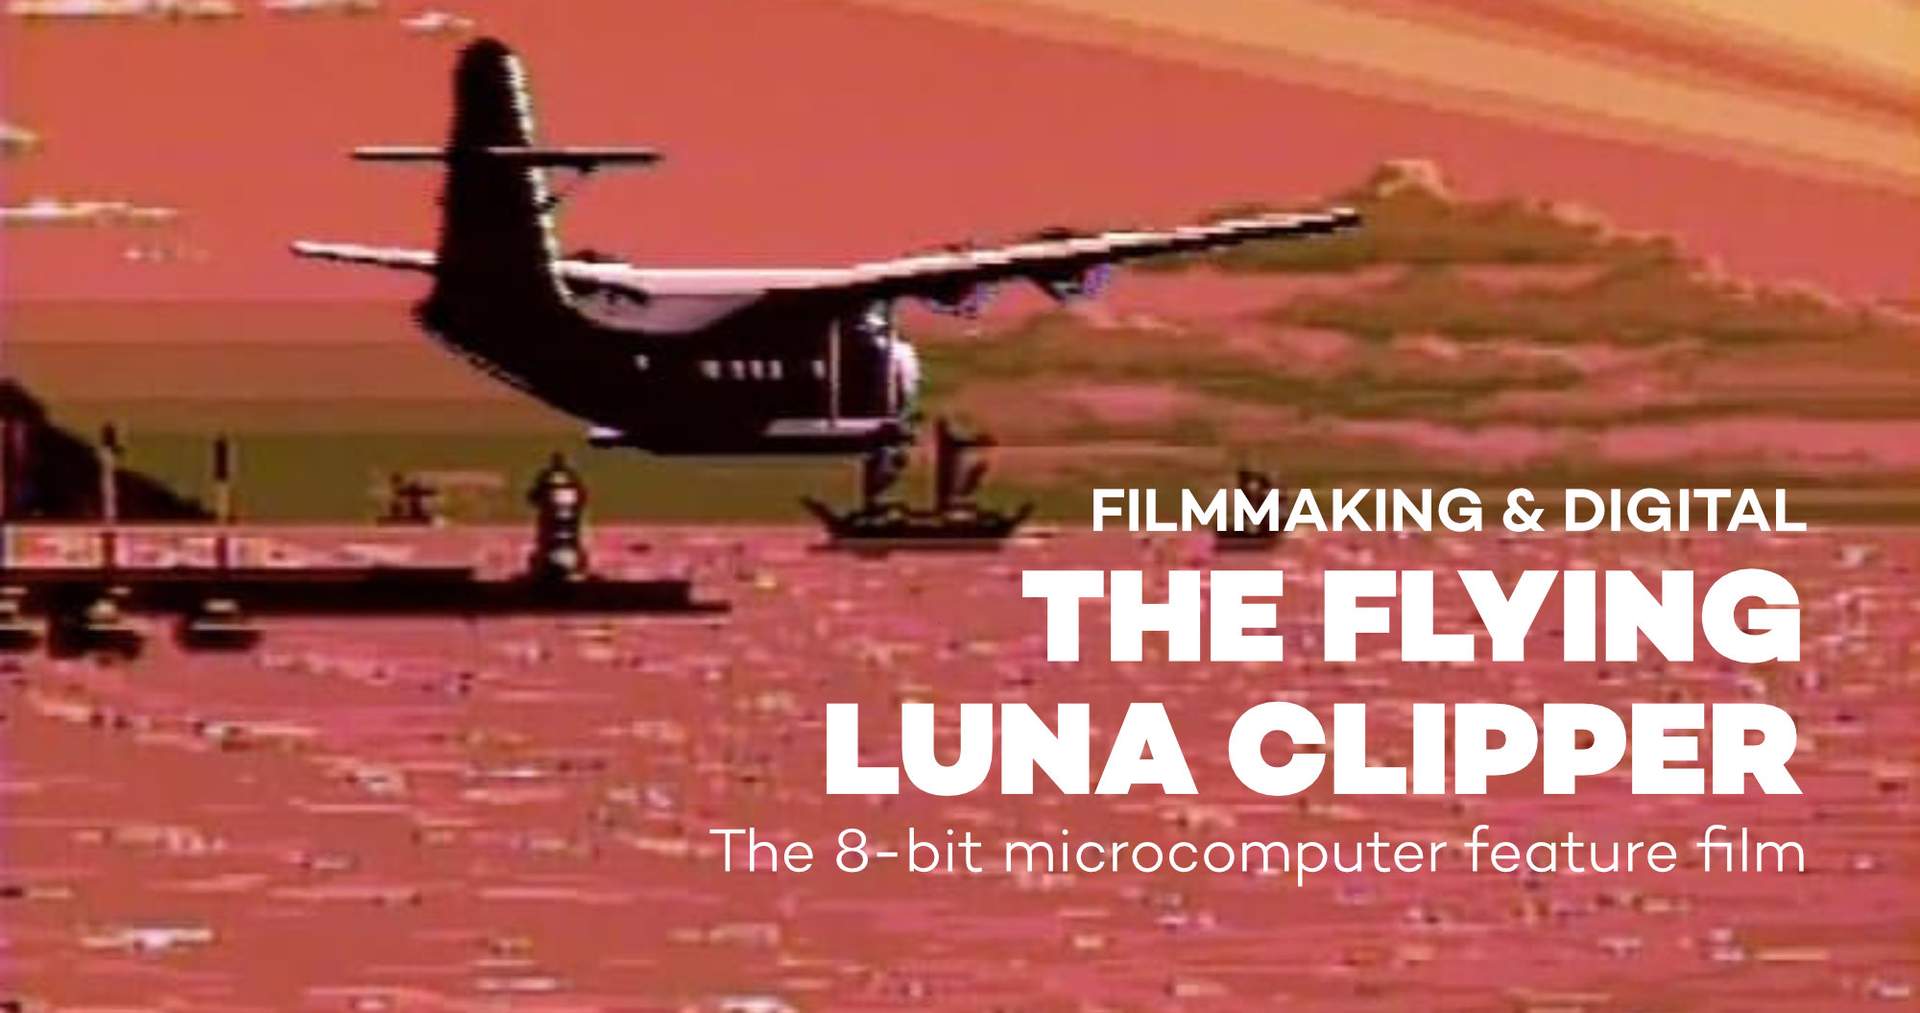 The Flying Luna Clipper